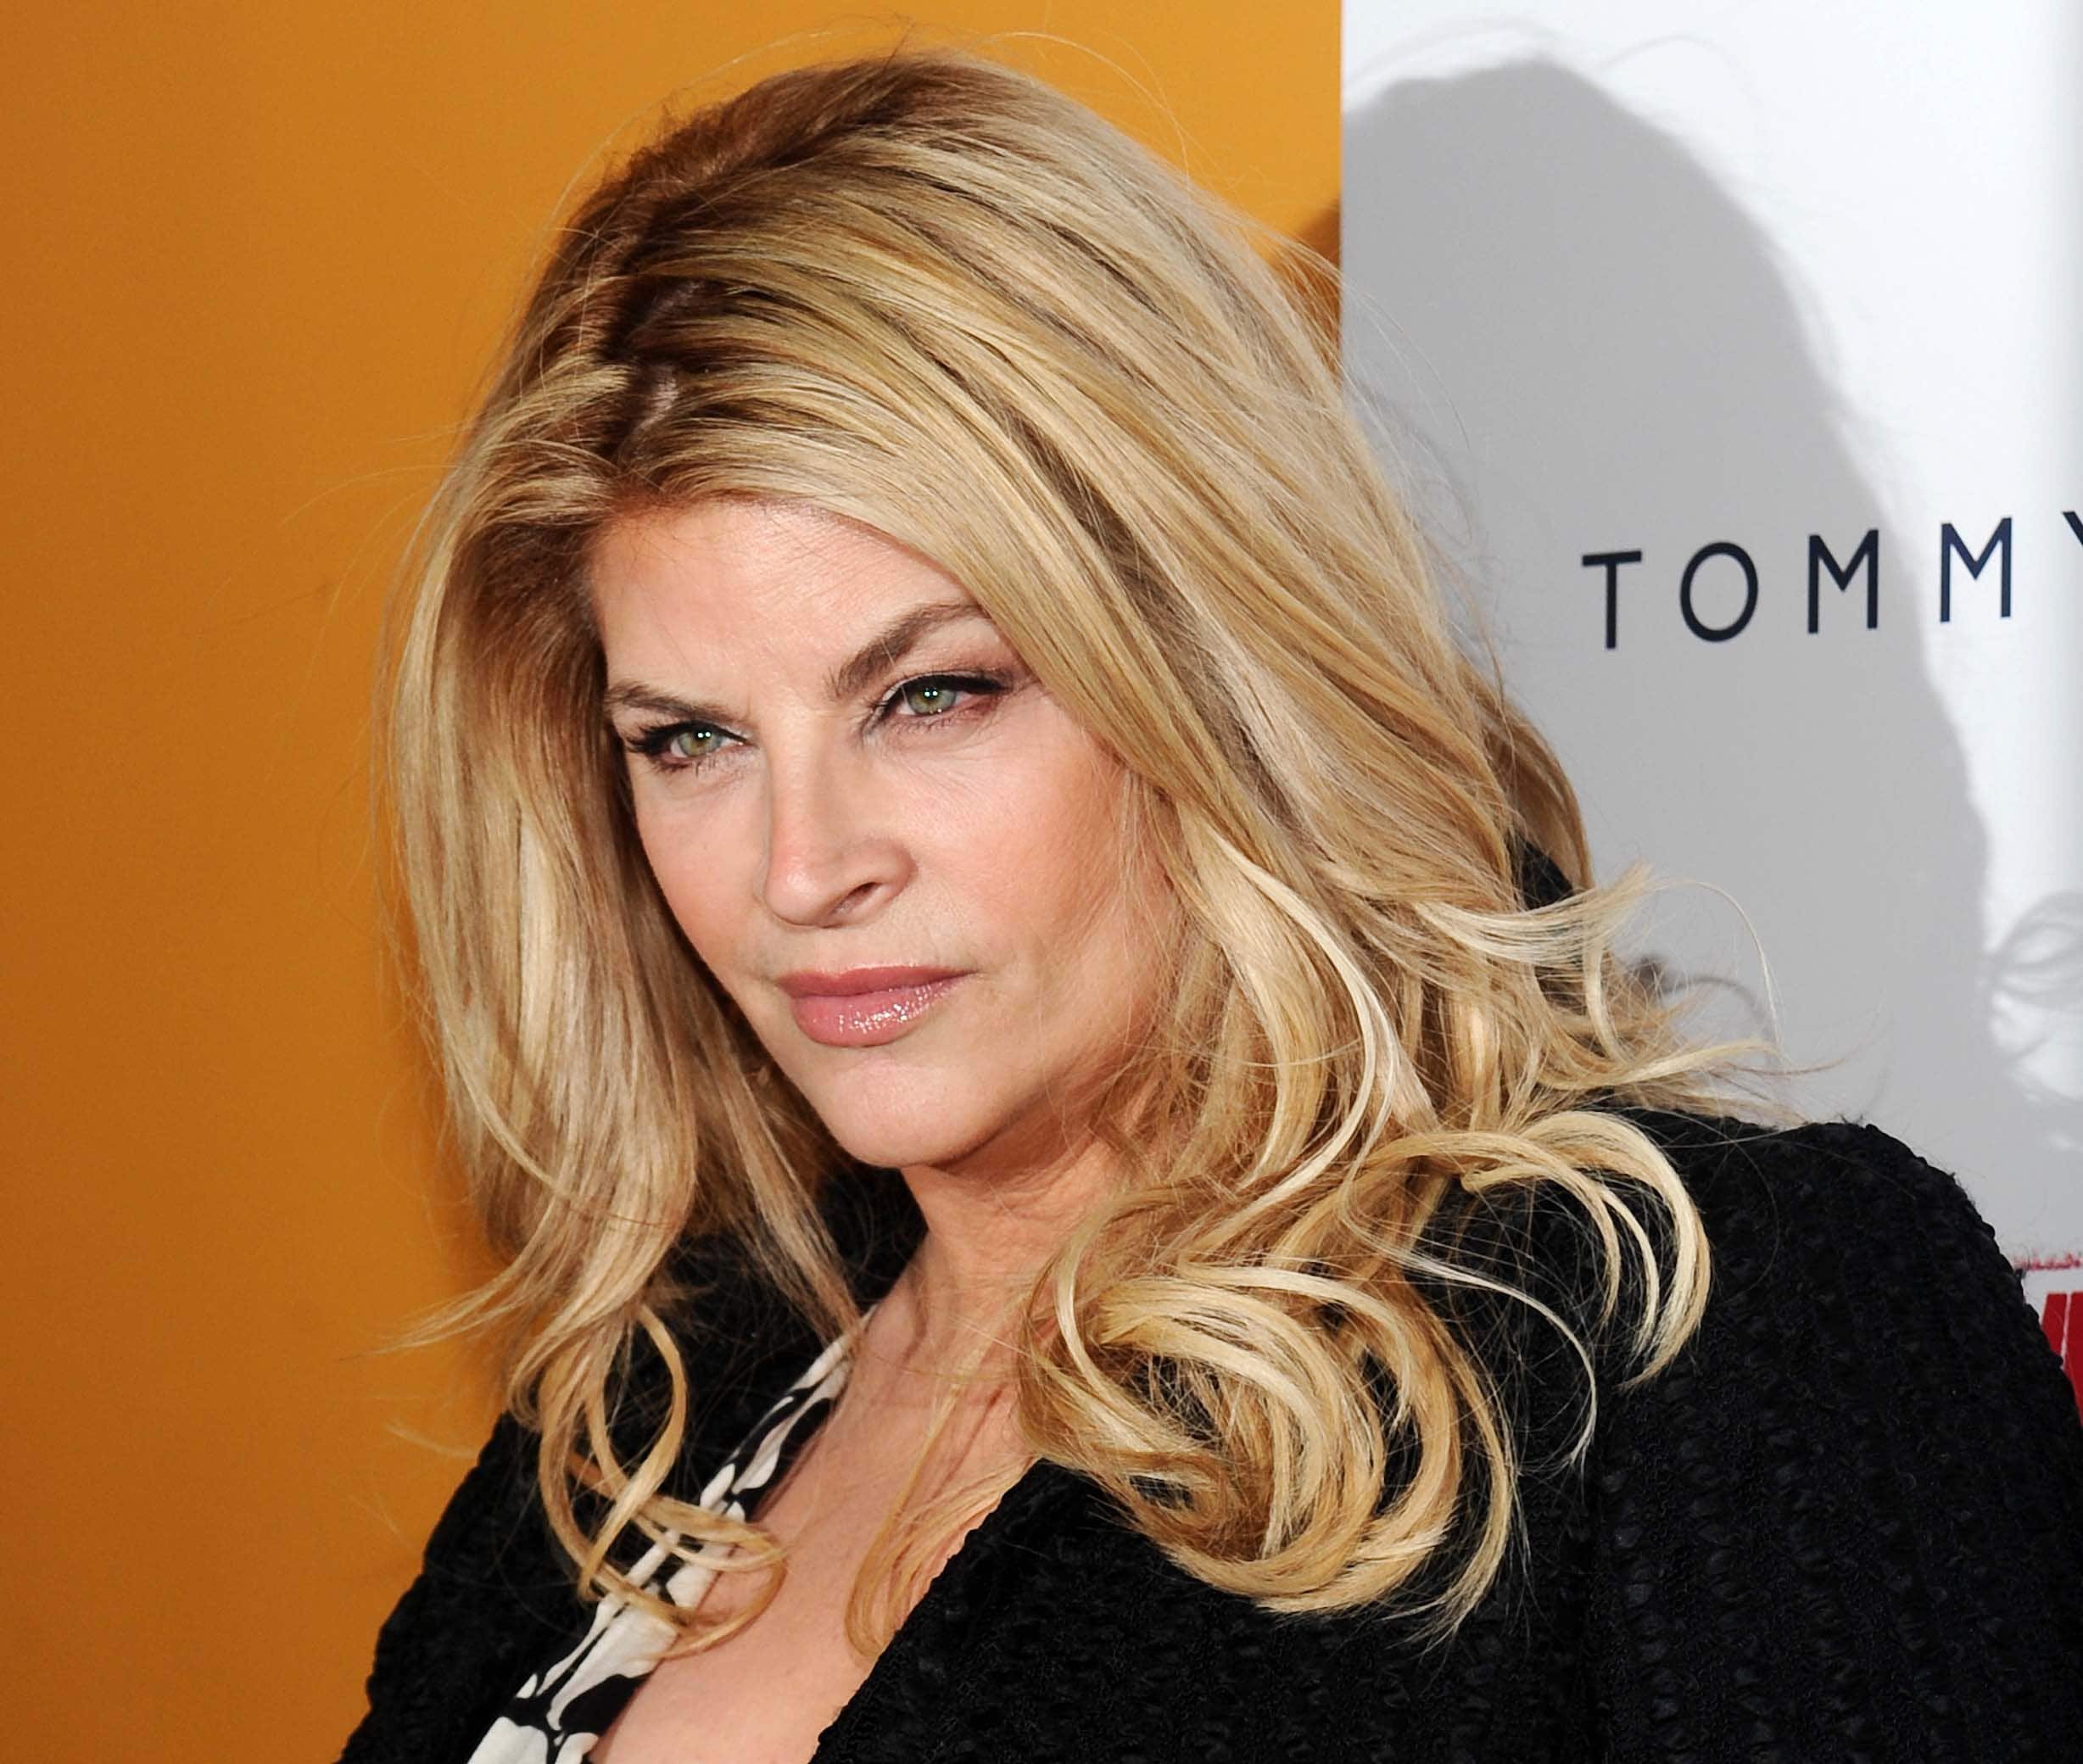 Kirstie Alley Died Of Colon Cancer